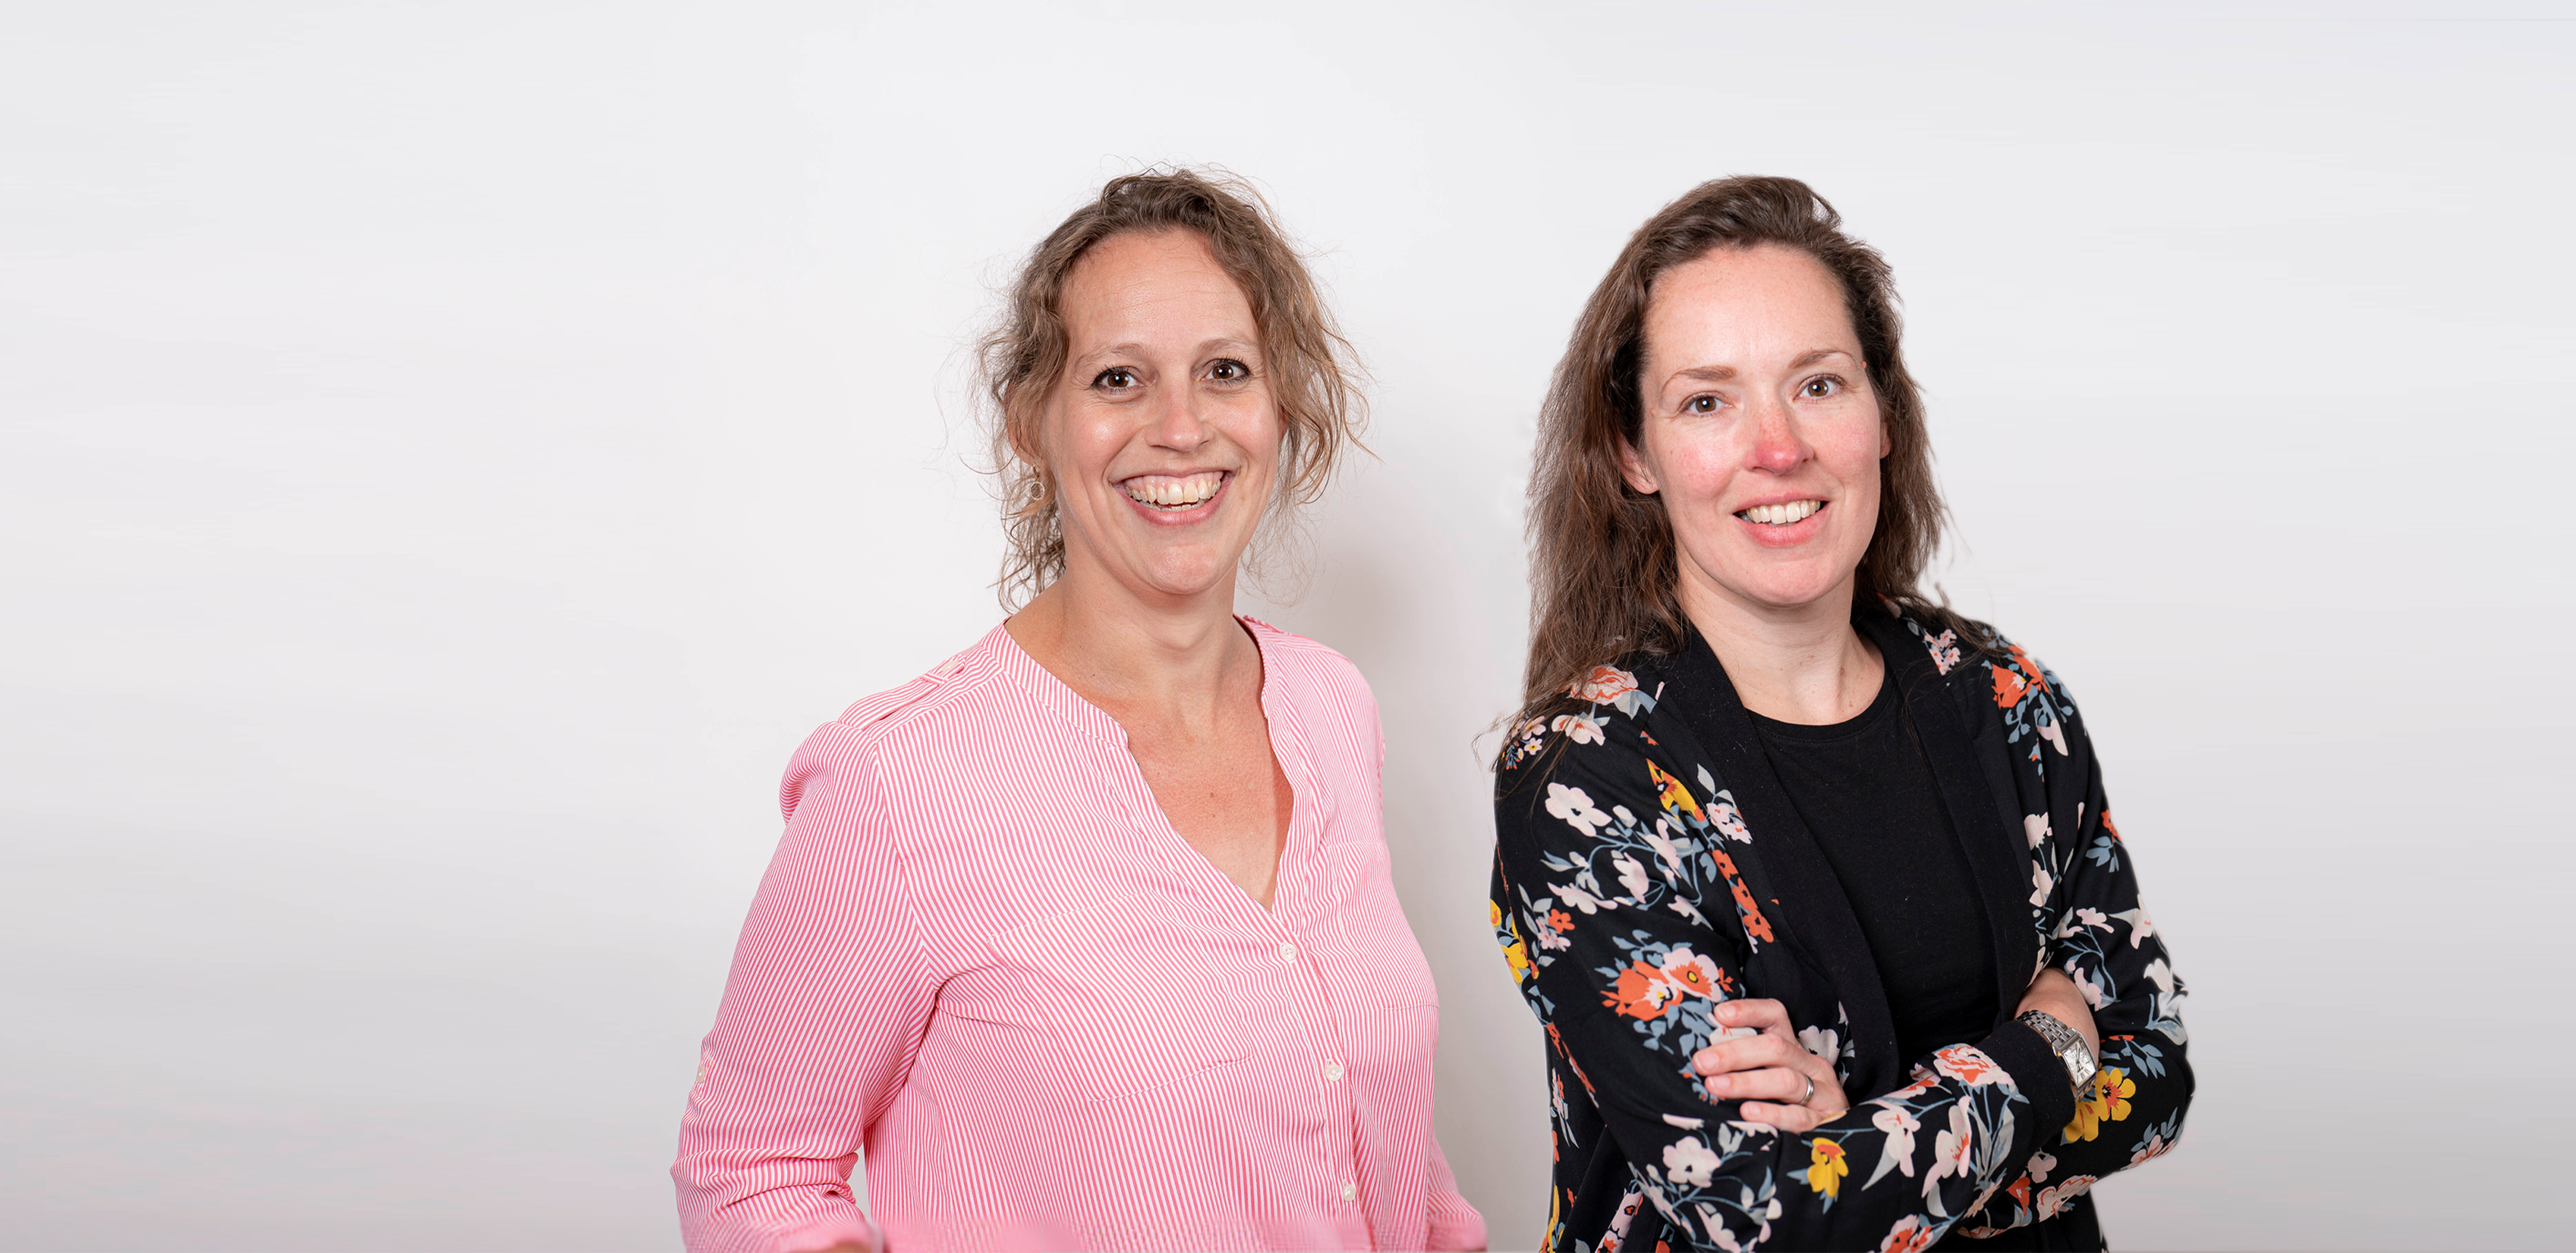 Working as a Business Controller: Marjolein and Ilona share their experience